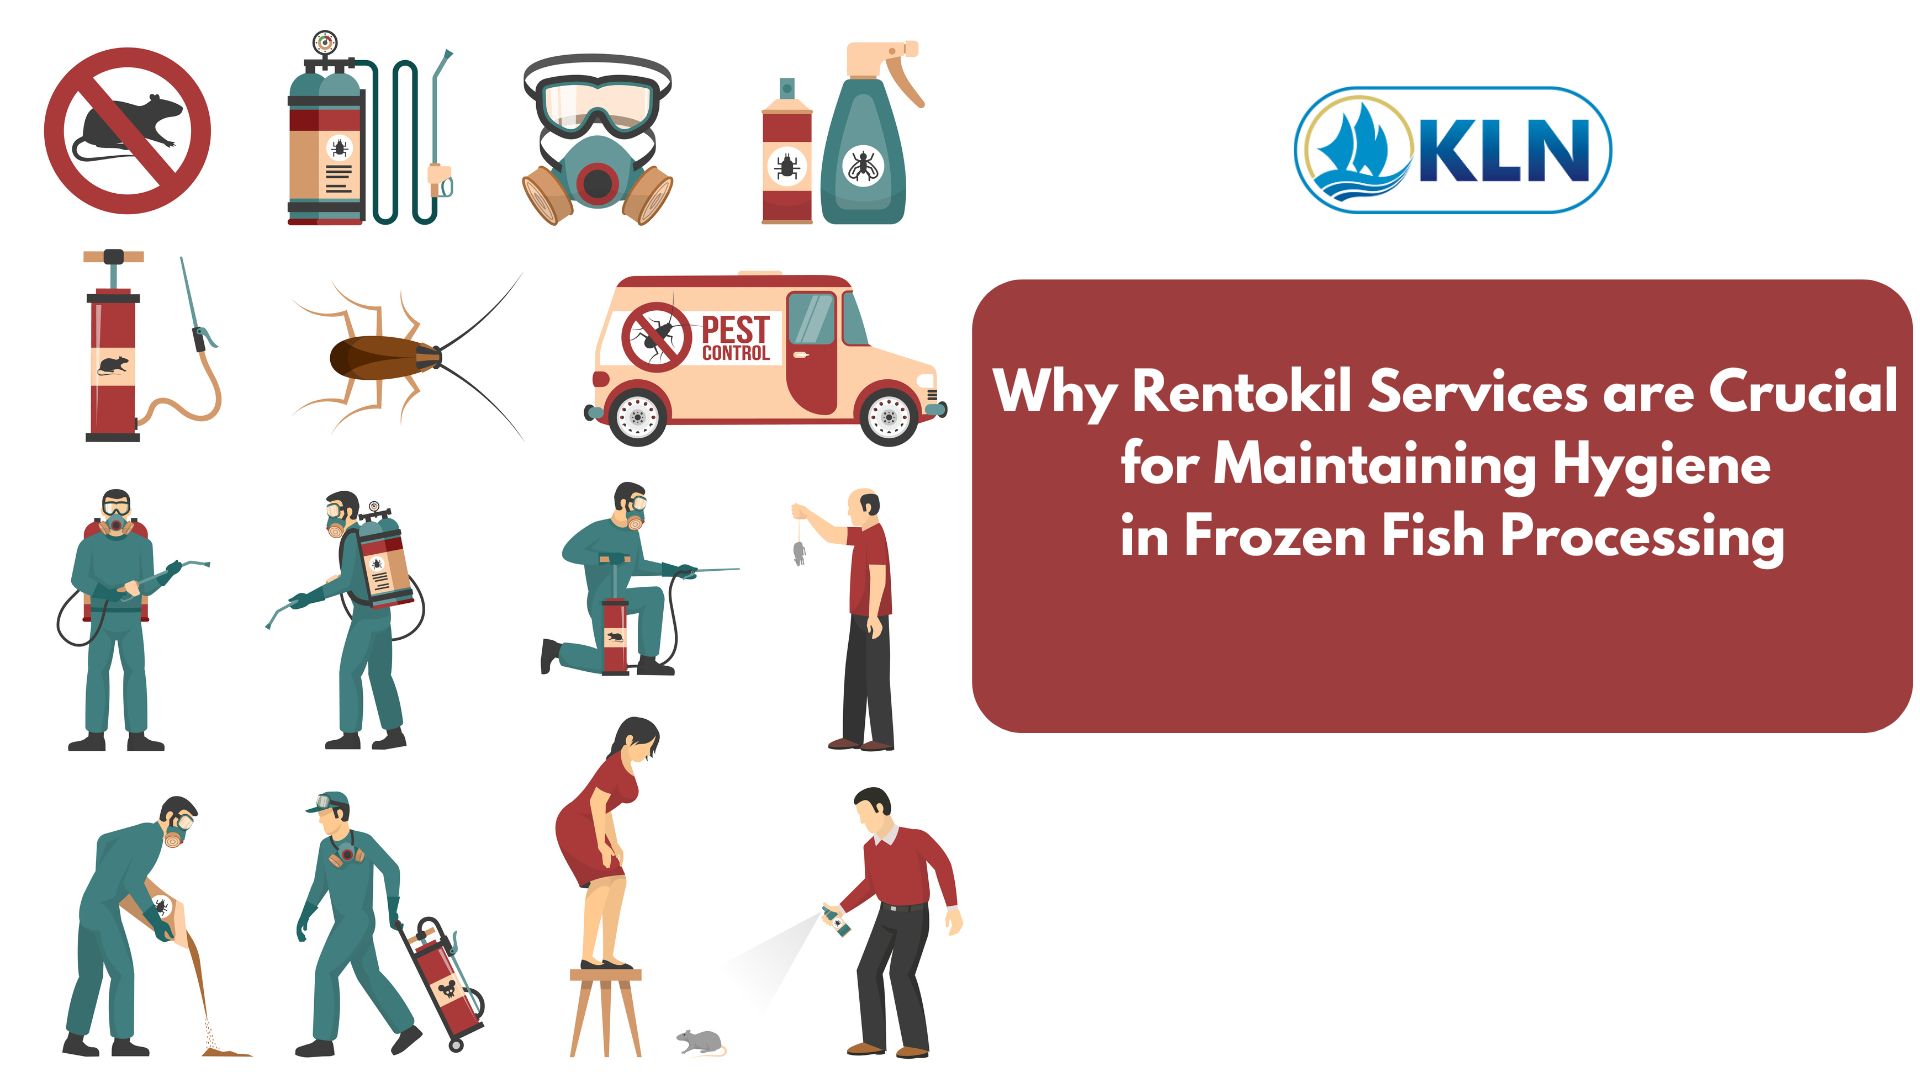 Why Rentokil Services are Crucial for Maintaining Hygiene in Frozen Fish Processing